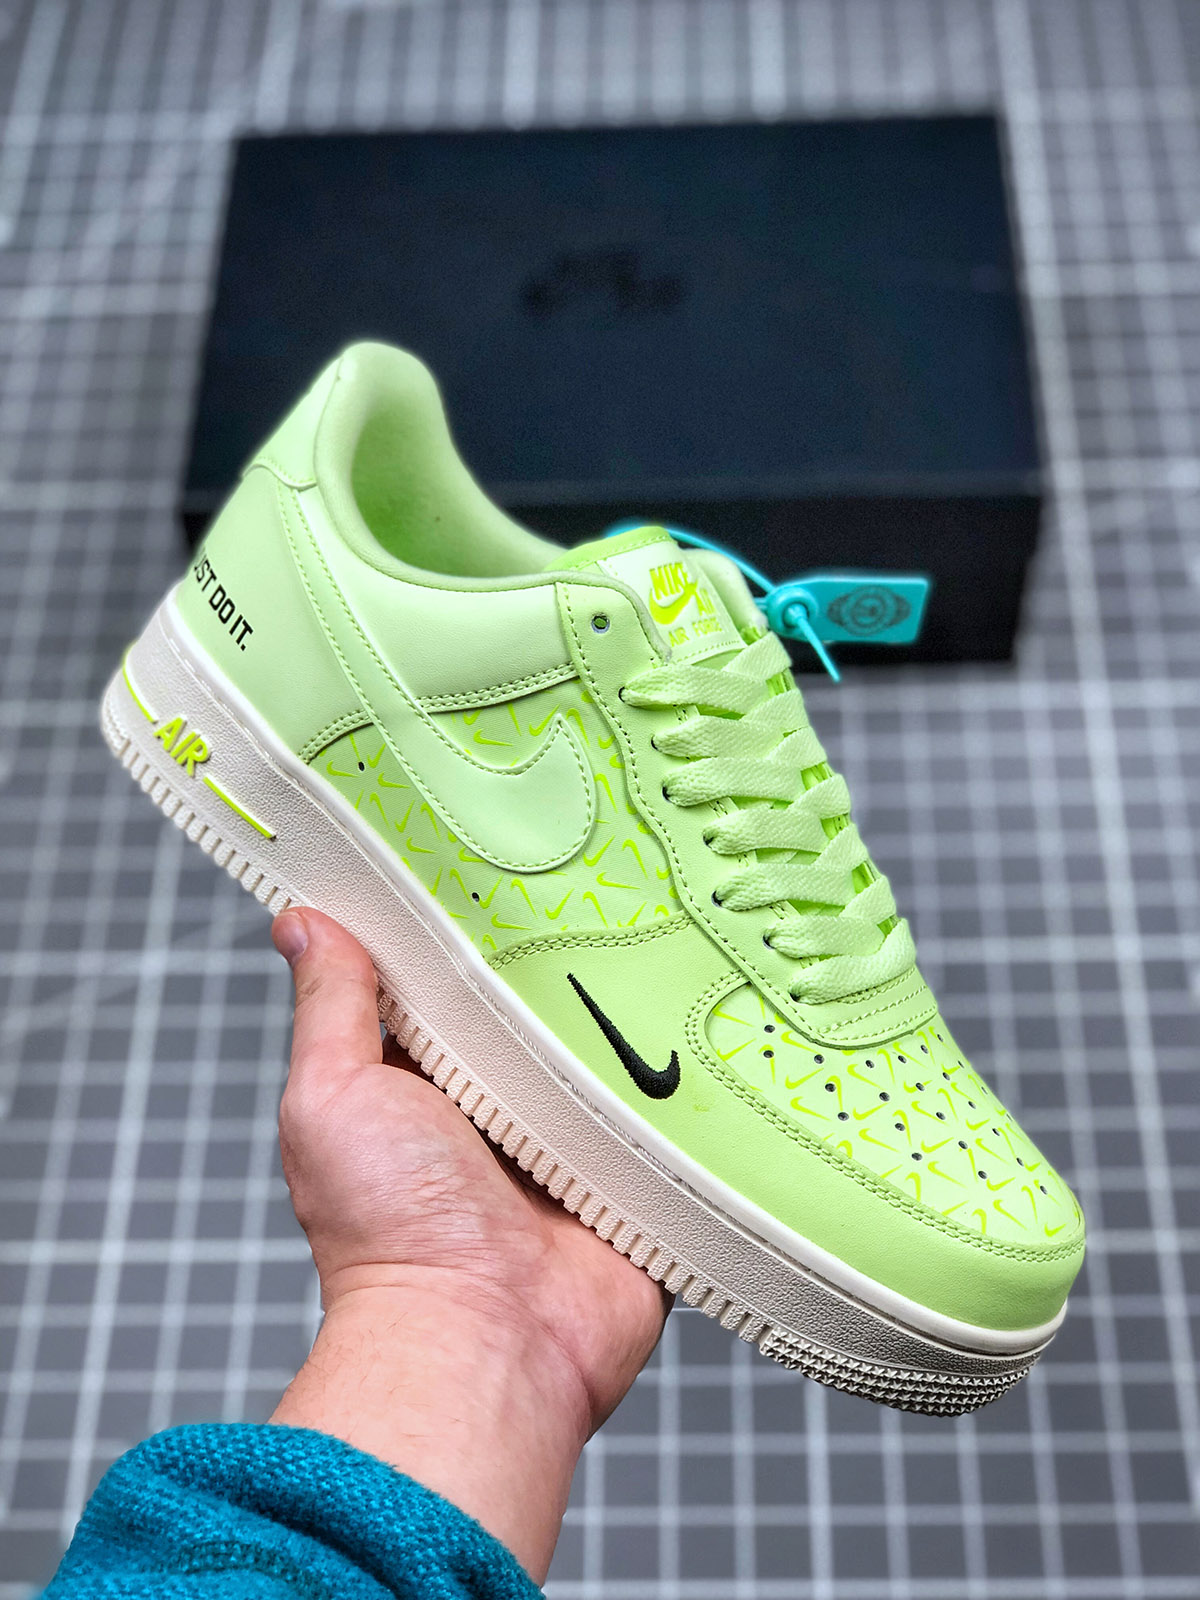 Nike Air Force 1 Low “Just Do It” Neon Yellow CT2541-700 For Sale ...